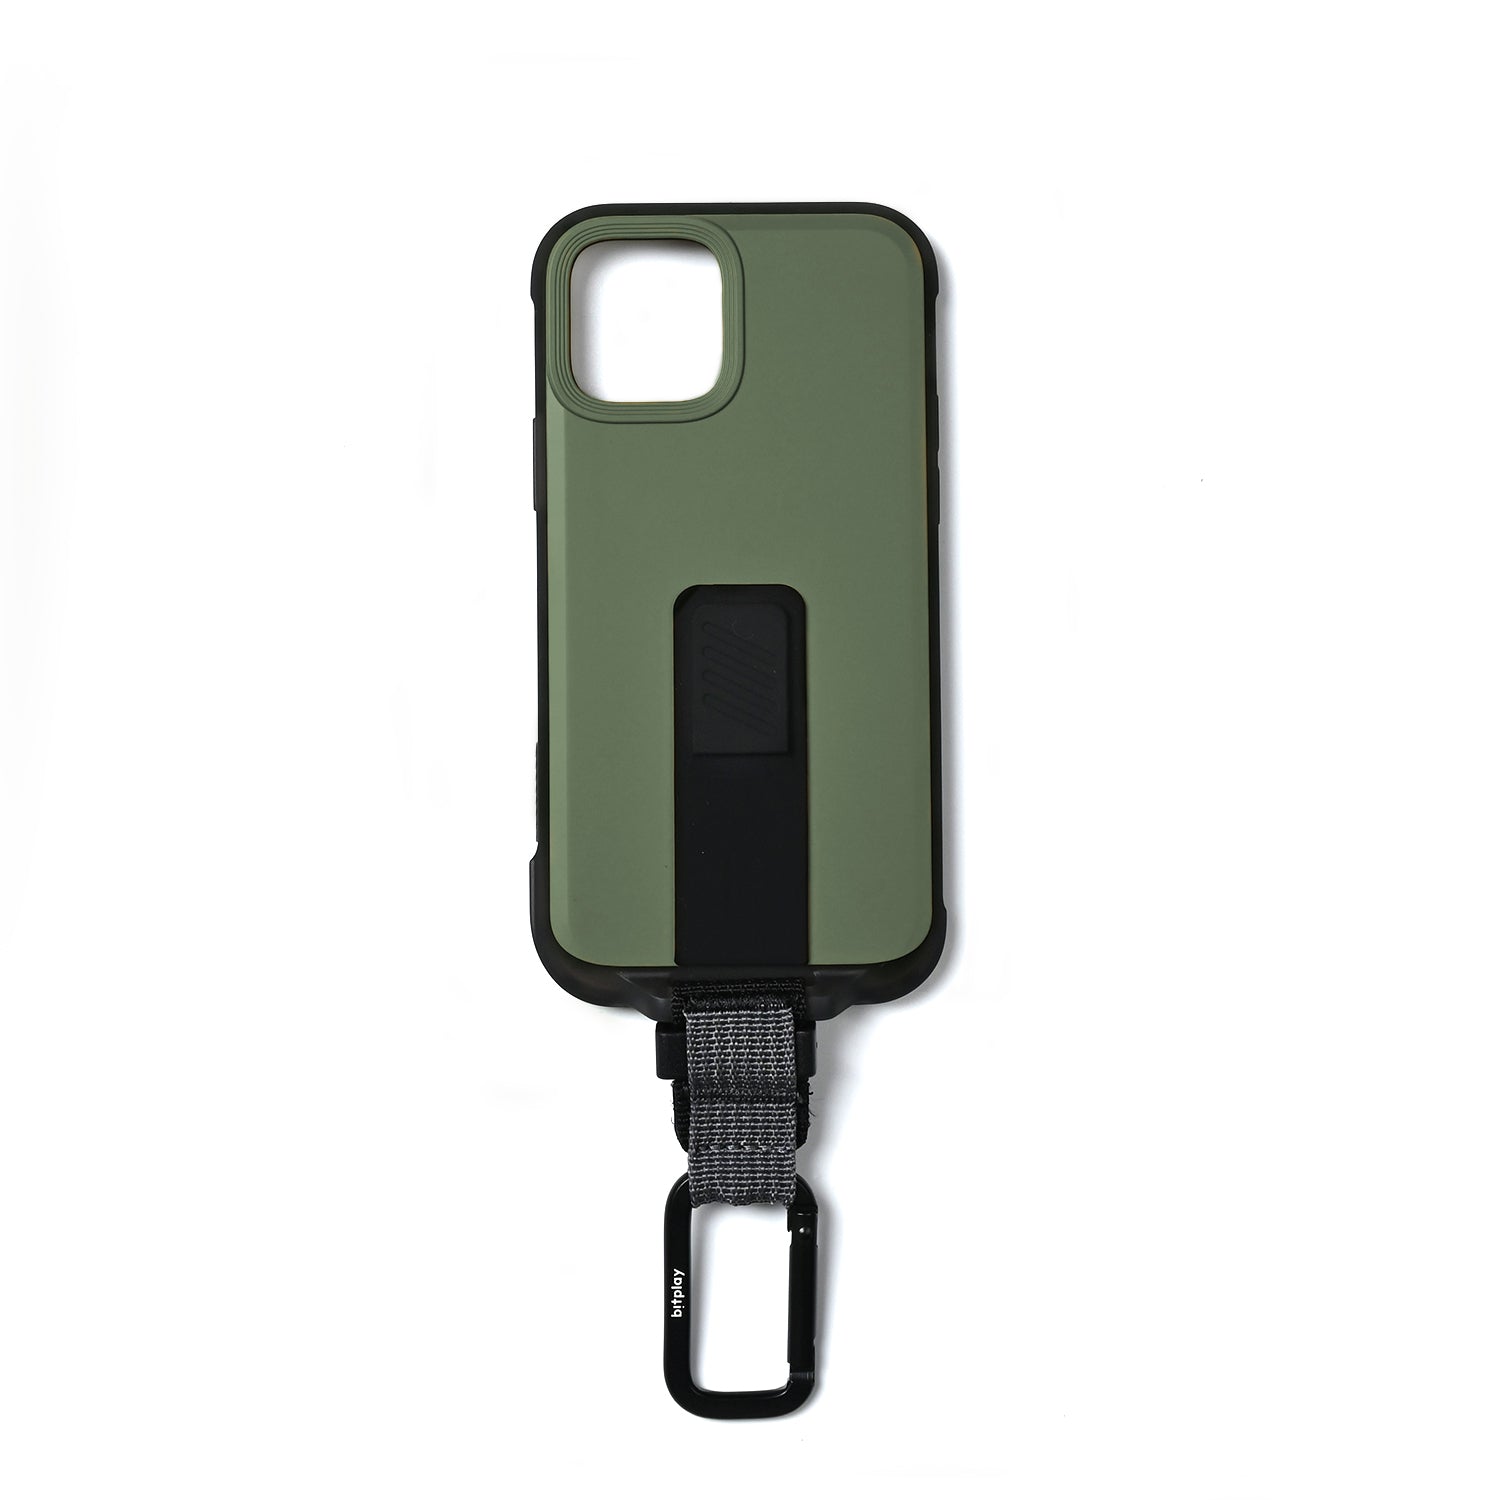 Wander Case for iPhone 12 Series - Green